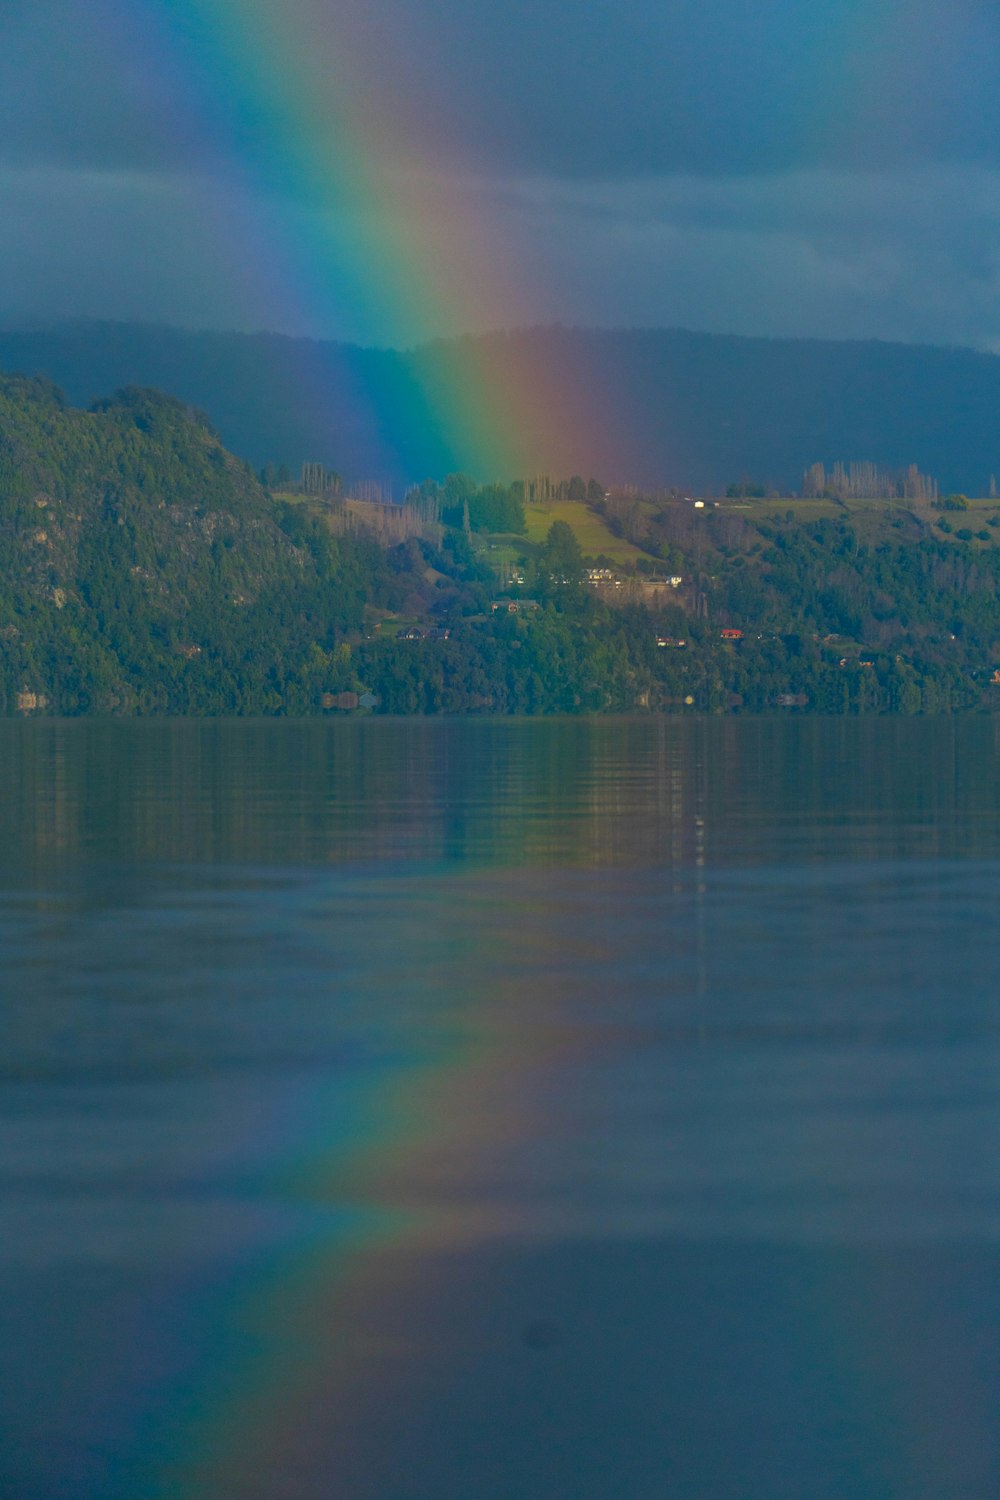 a rainbow shines in the sky over a lake